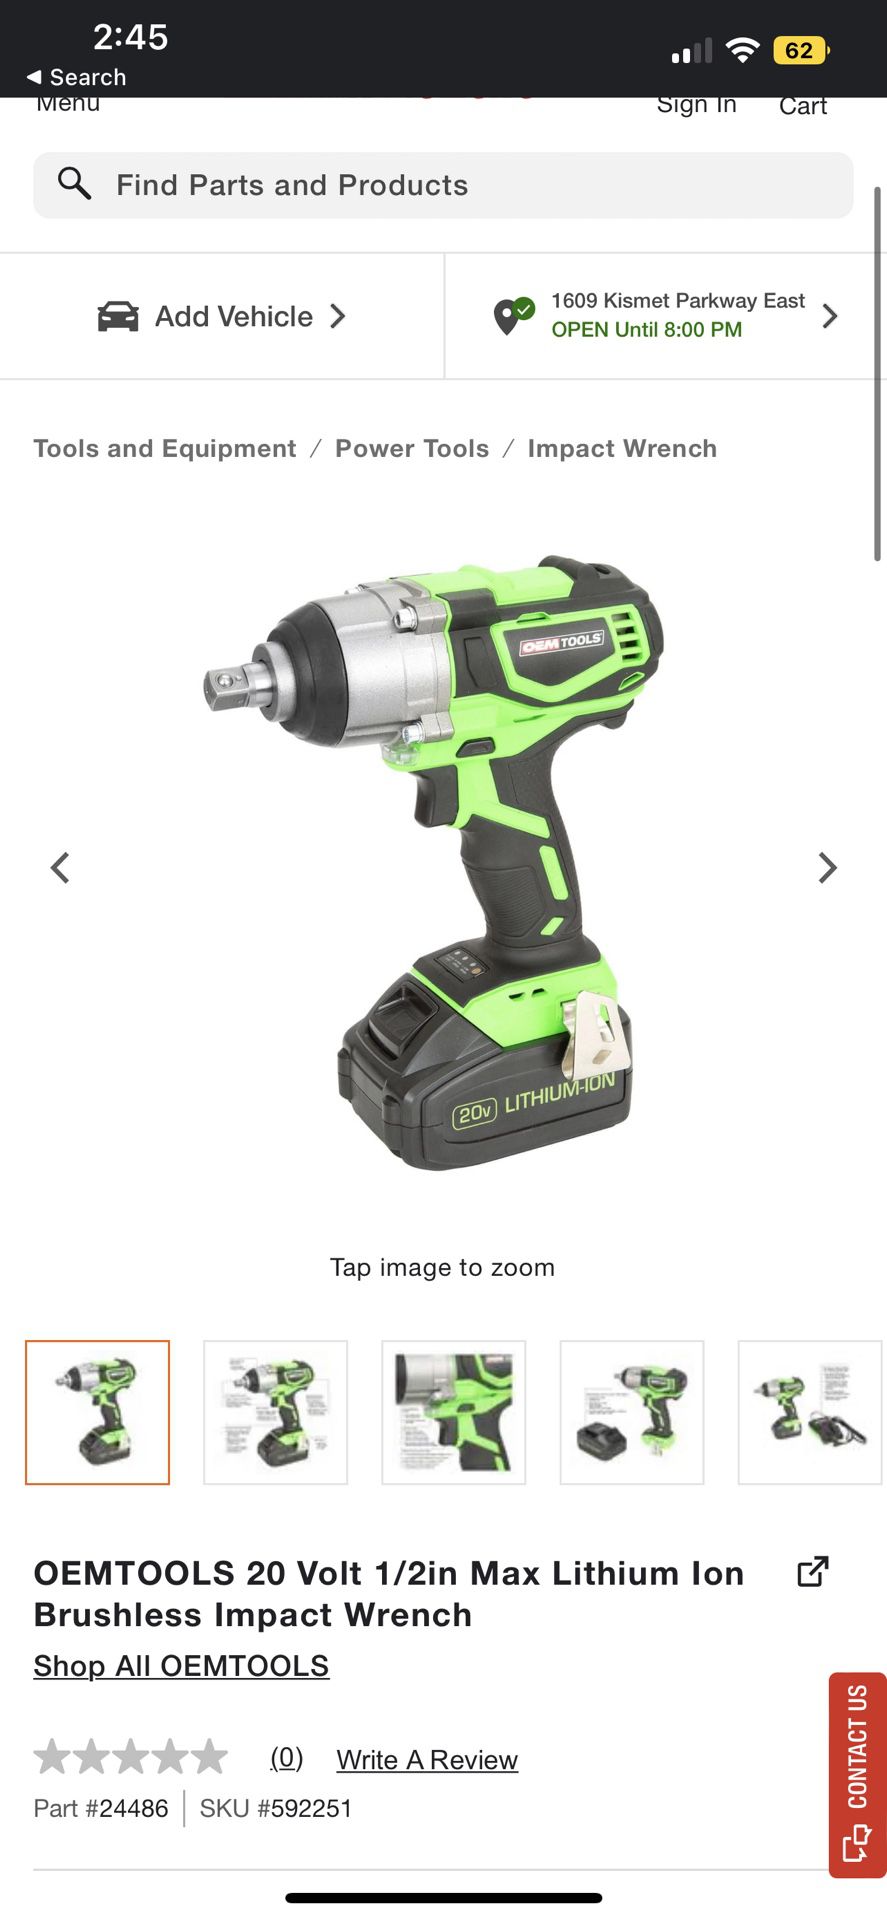 OEMTOOLS 20 Volt 1/2in Max Lithium Ion Brushless Impact Wrench for Sale in  Cape Coral, FL OfferUp